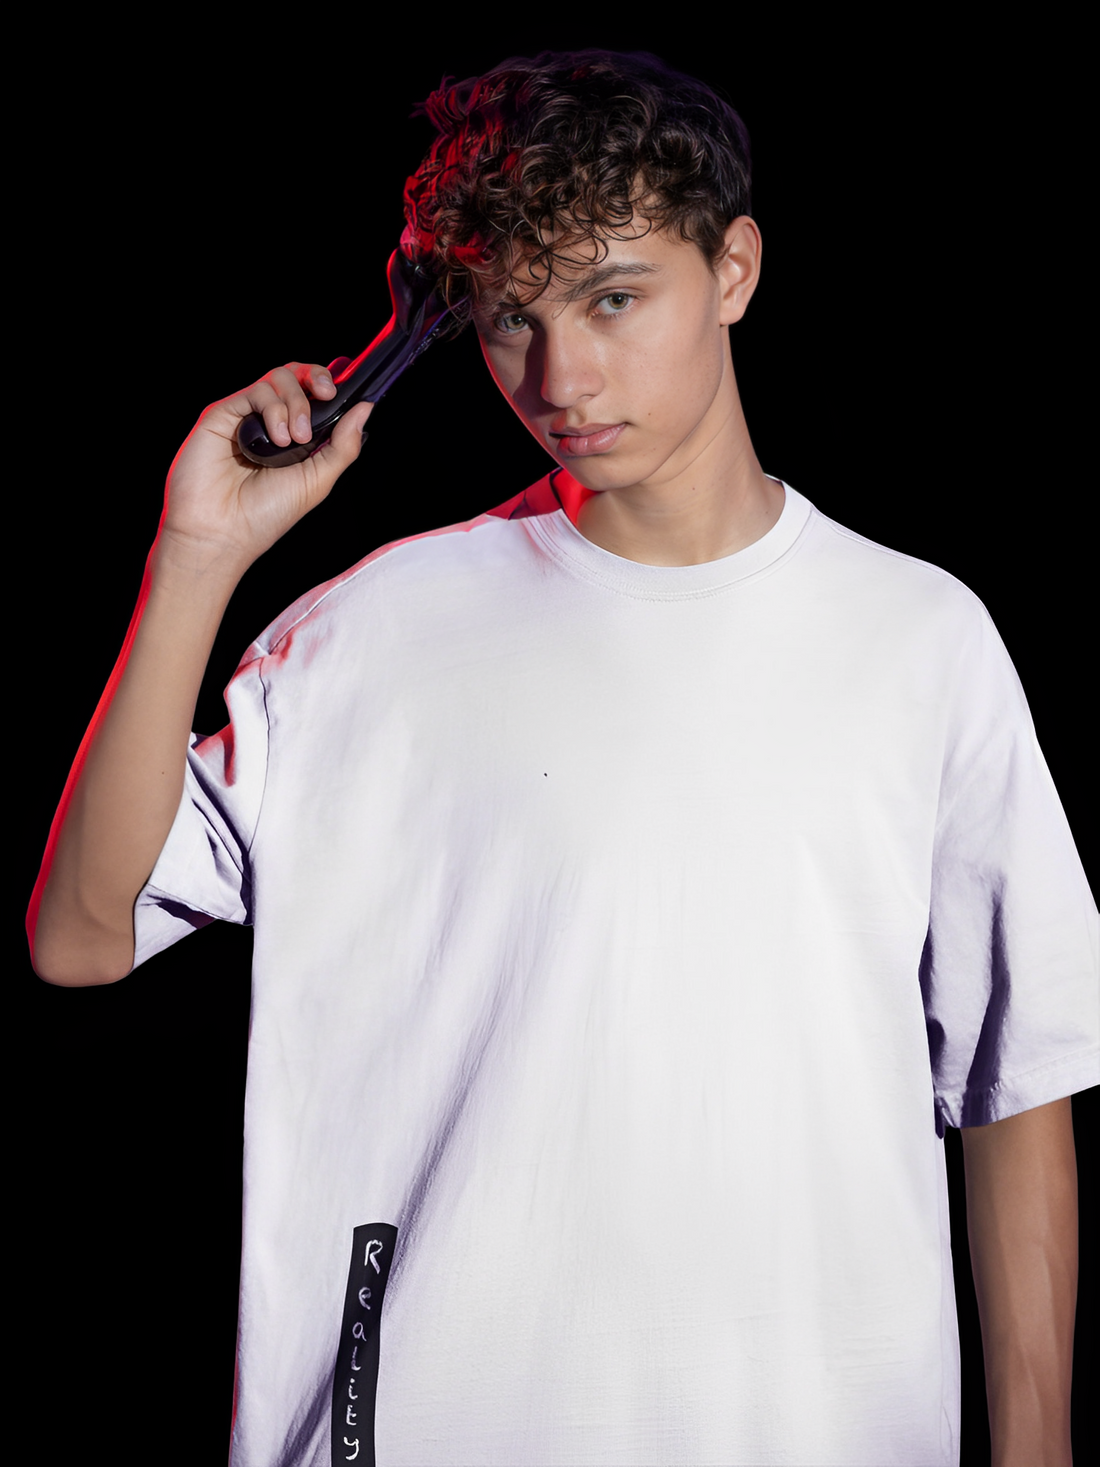 Step into Reality with Our Dark White Cotton Oversized T-Shirt Designs